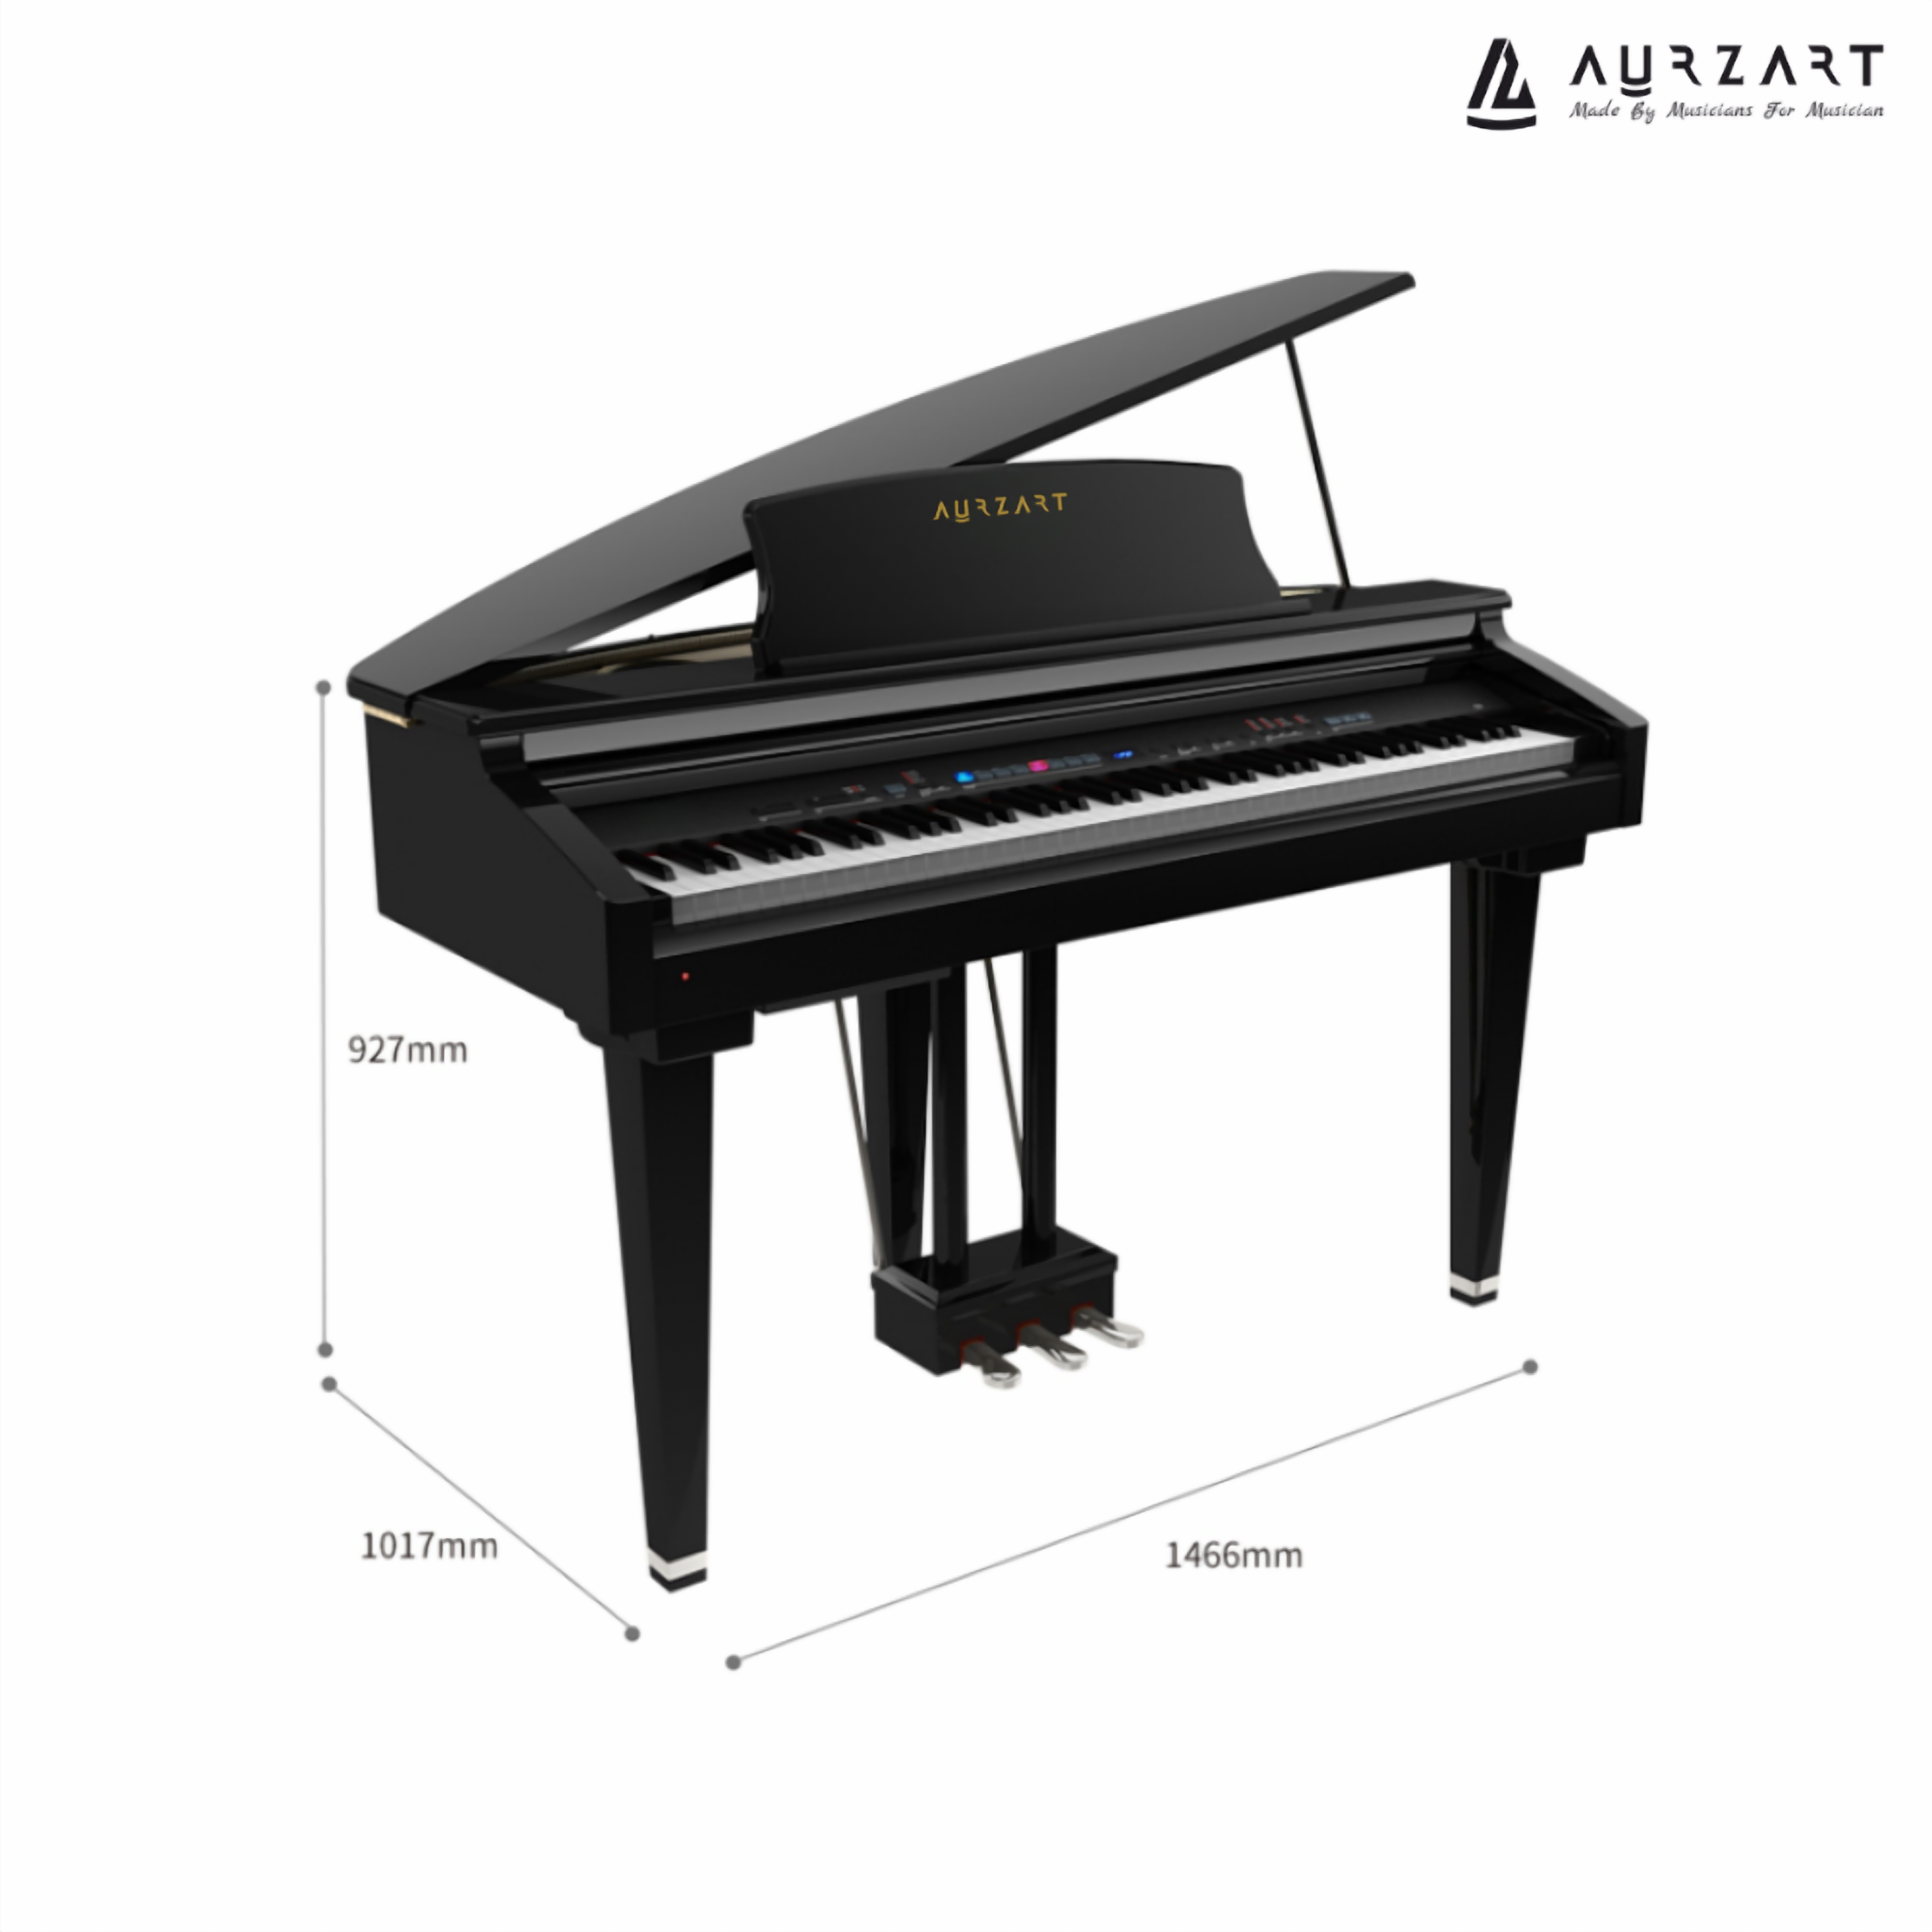 Aurzart baby grand piano dimensions